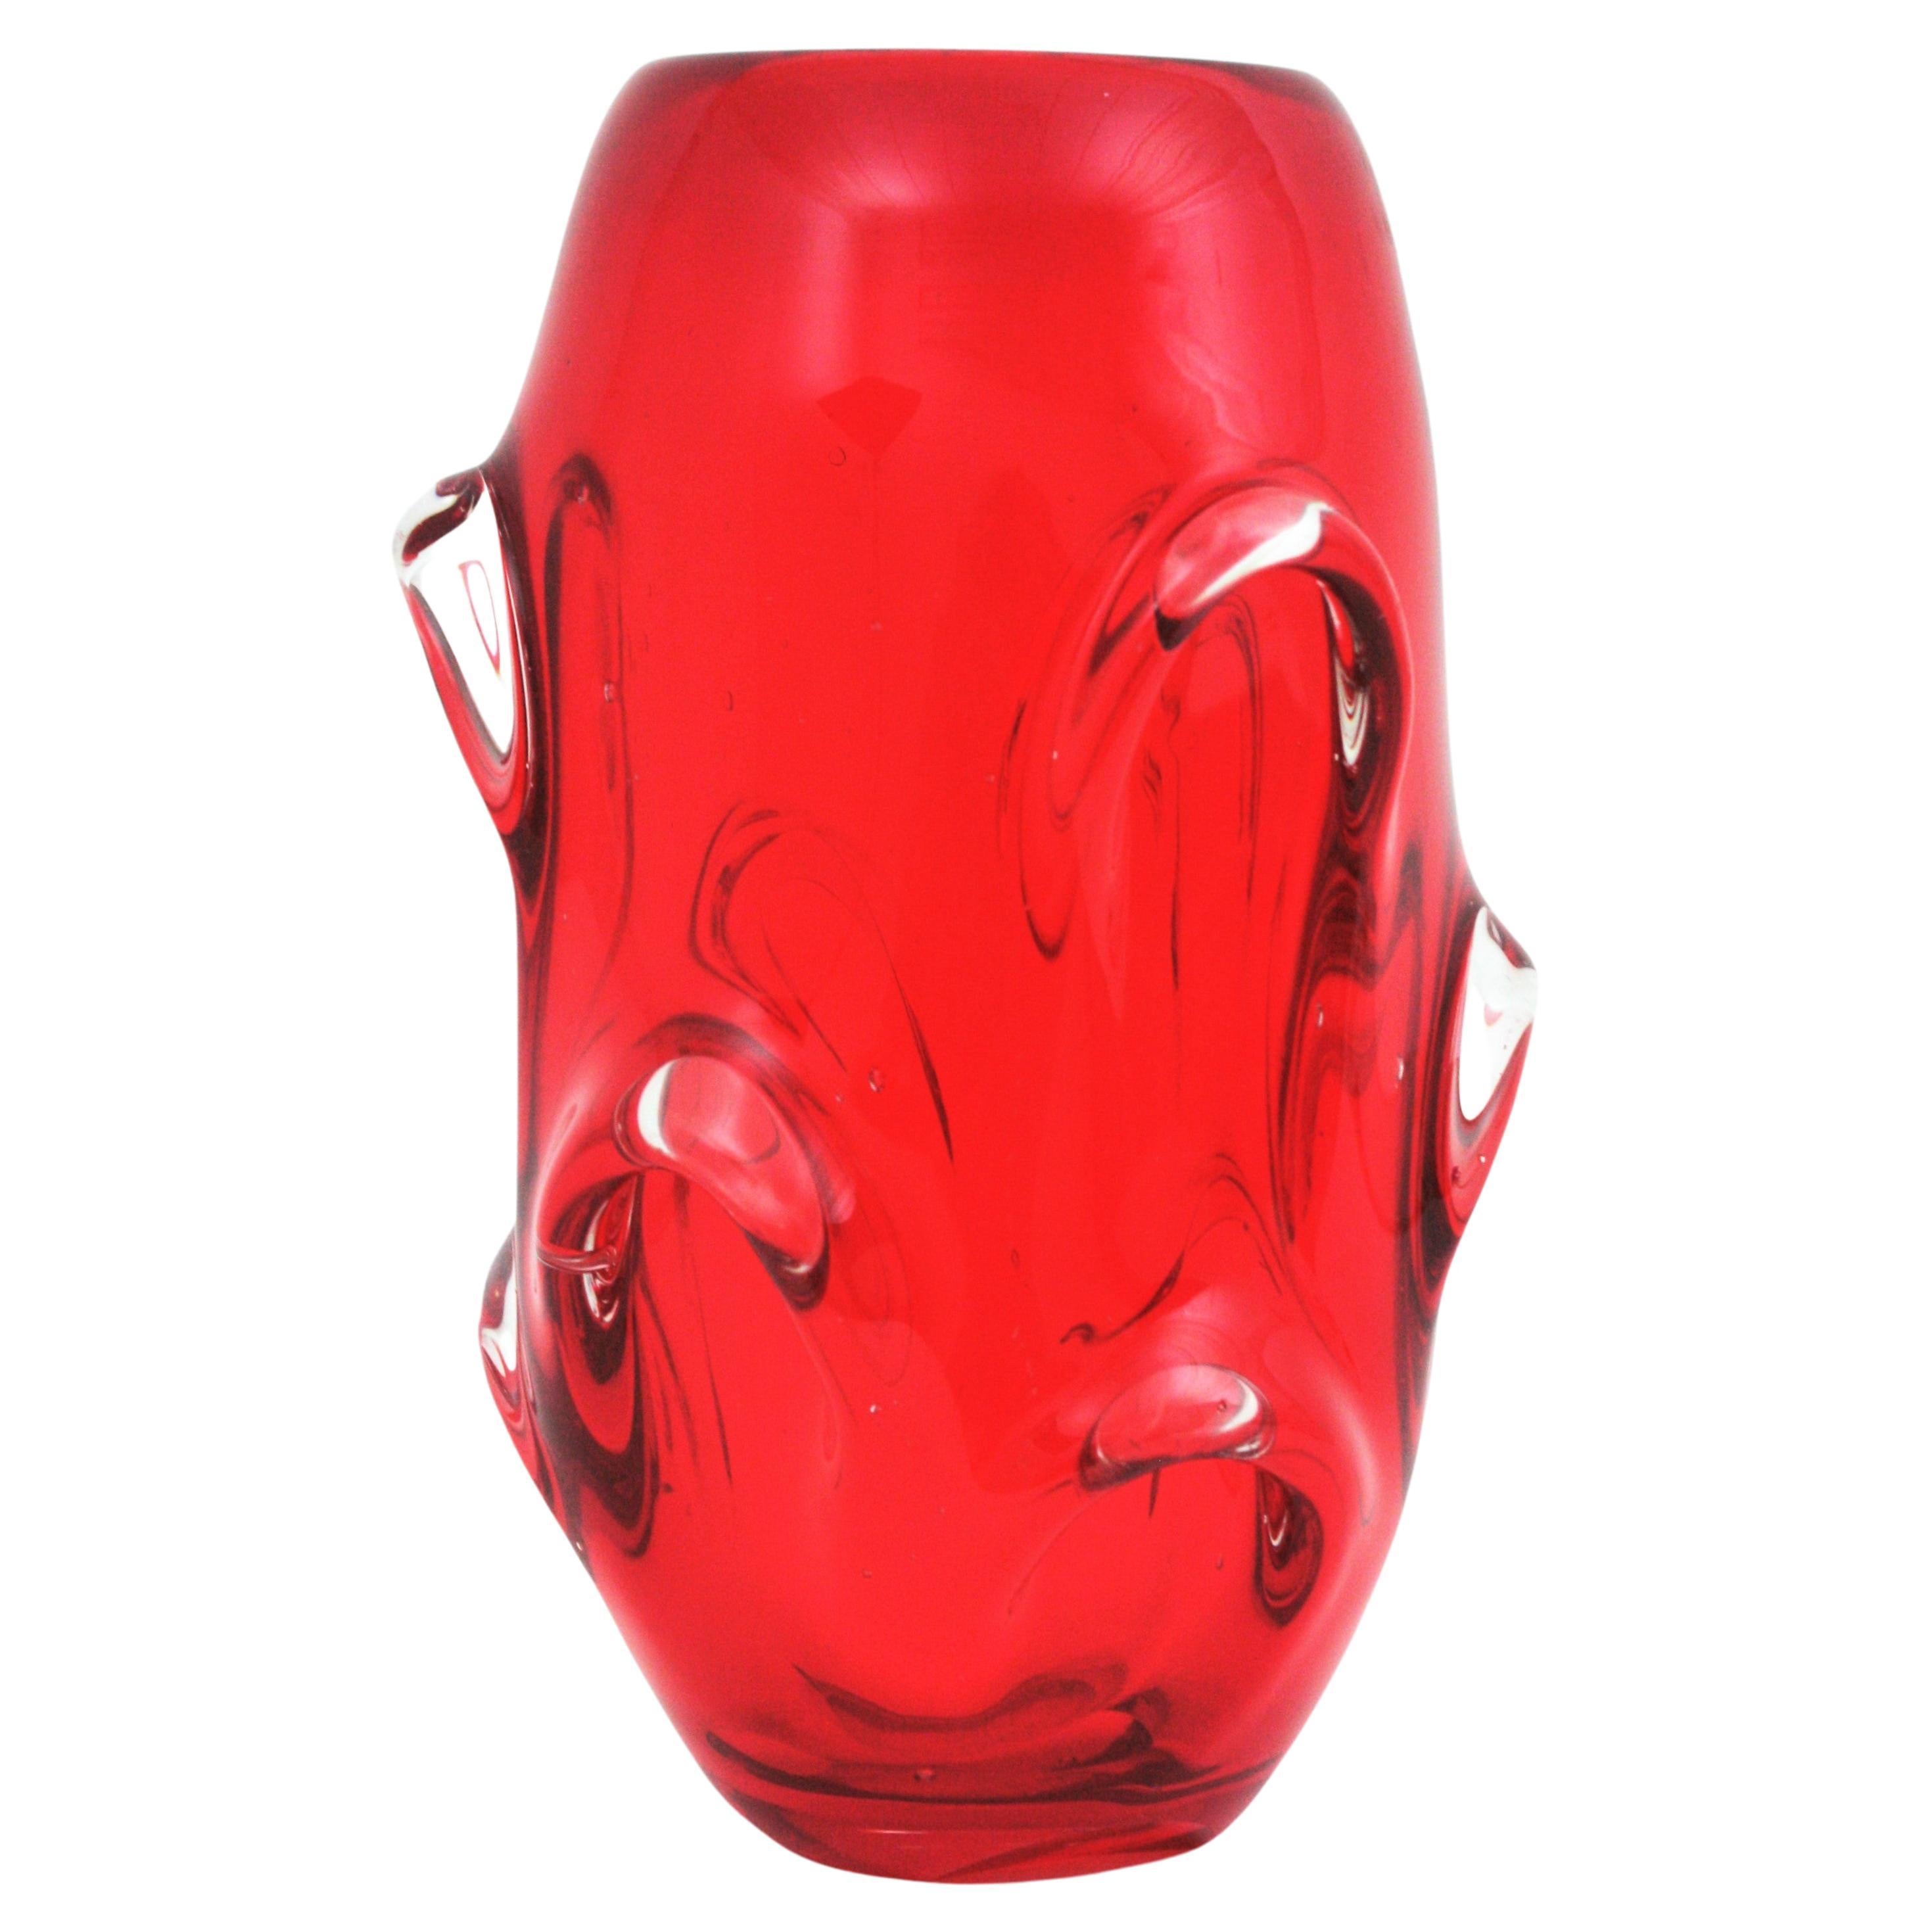 'Tronco' style red and clear Art glass vase. Attributed to Archimede Seguso, Italy, 1960s
An spectacular handblown Murano art glass vase in a vibrant ruby red with pulled details thorough. Very attractive when light goes down on it.
Use it as a